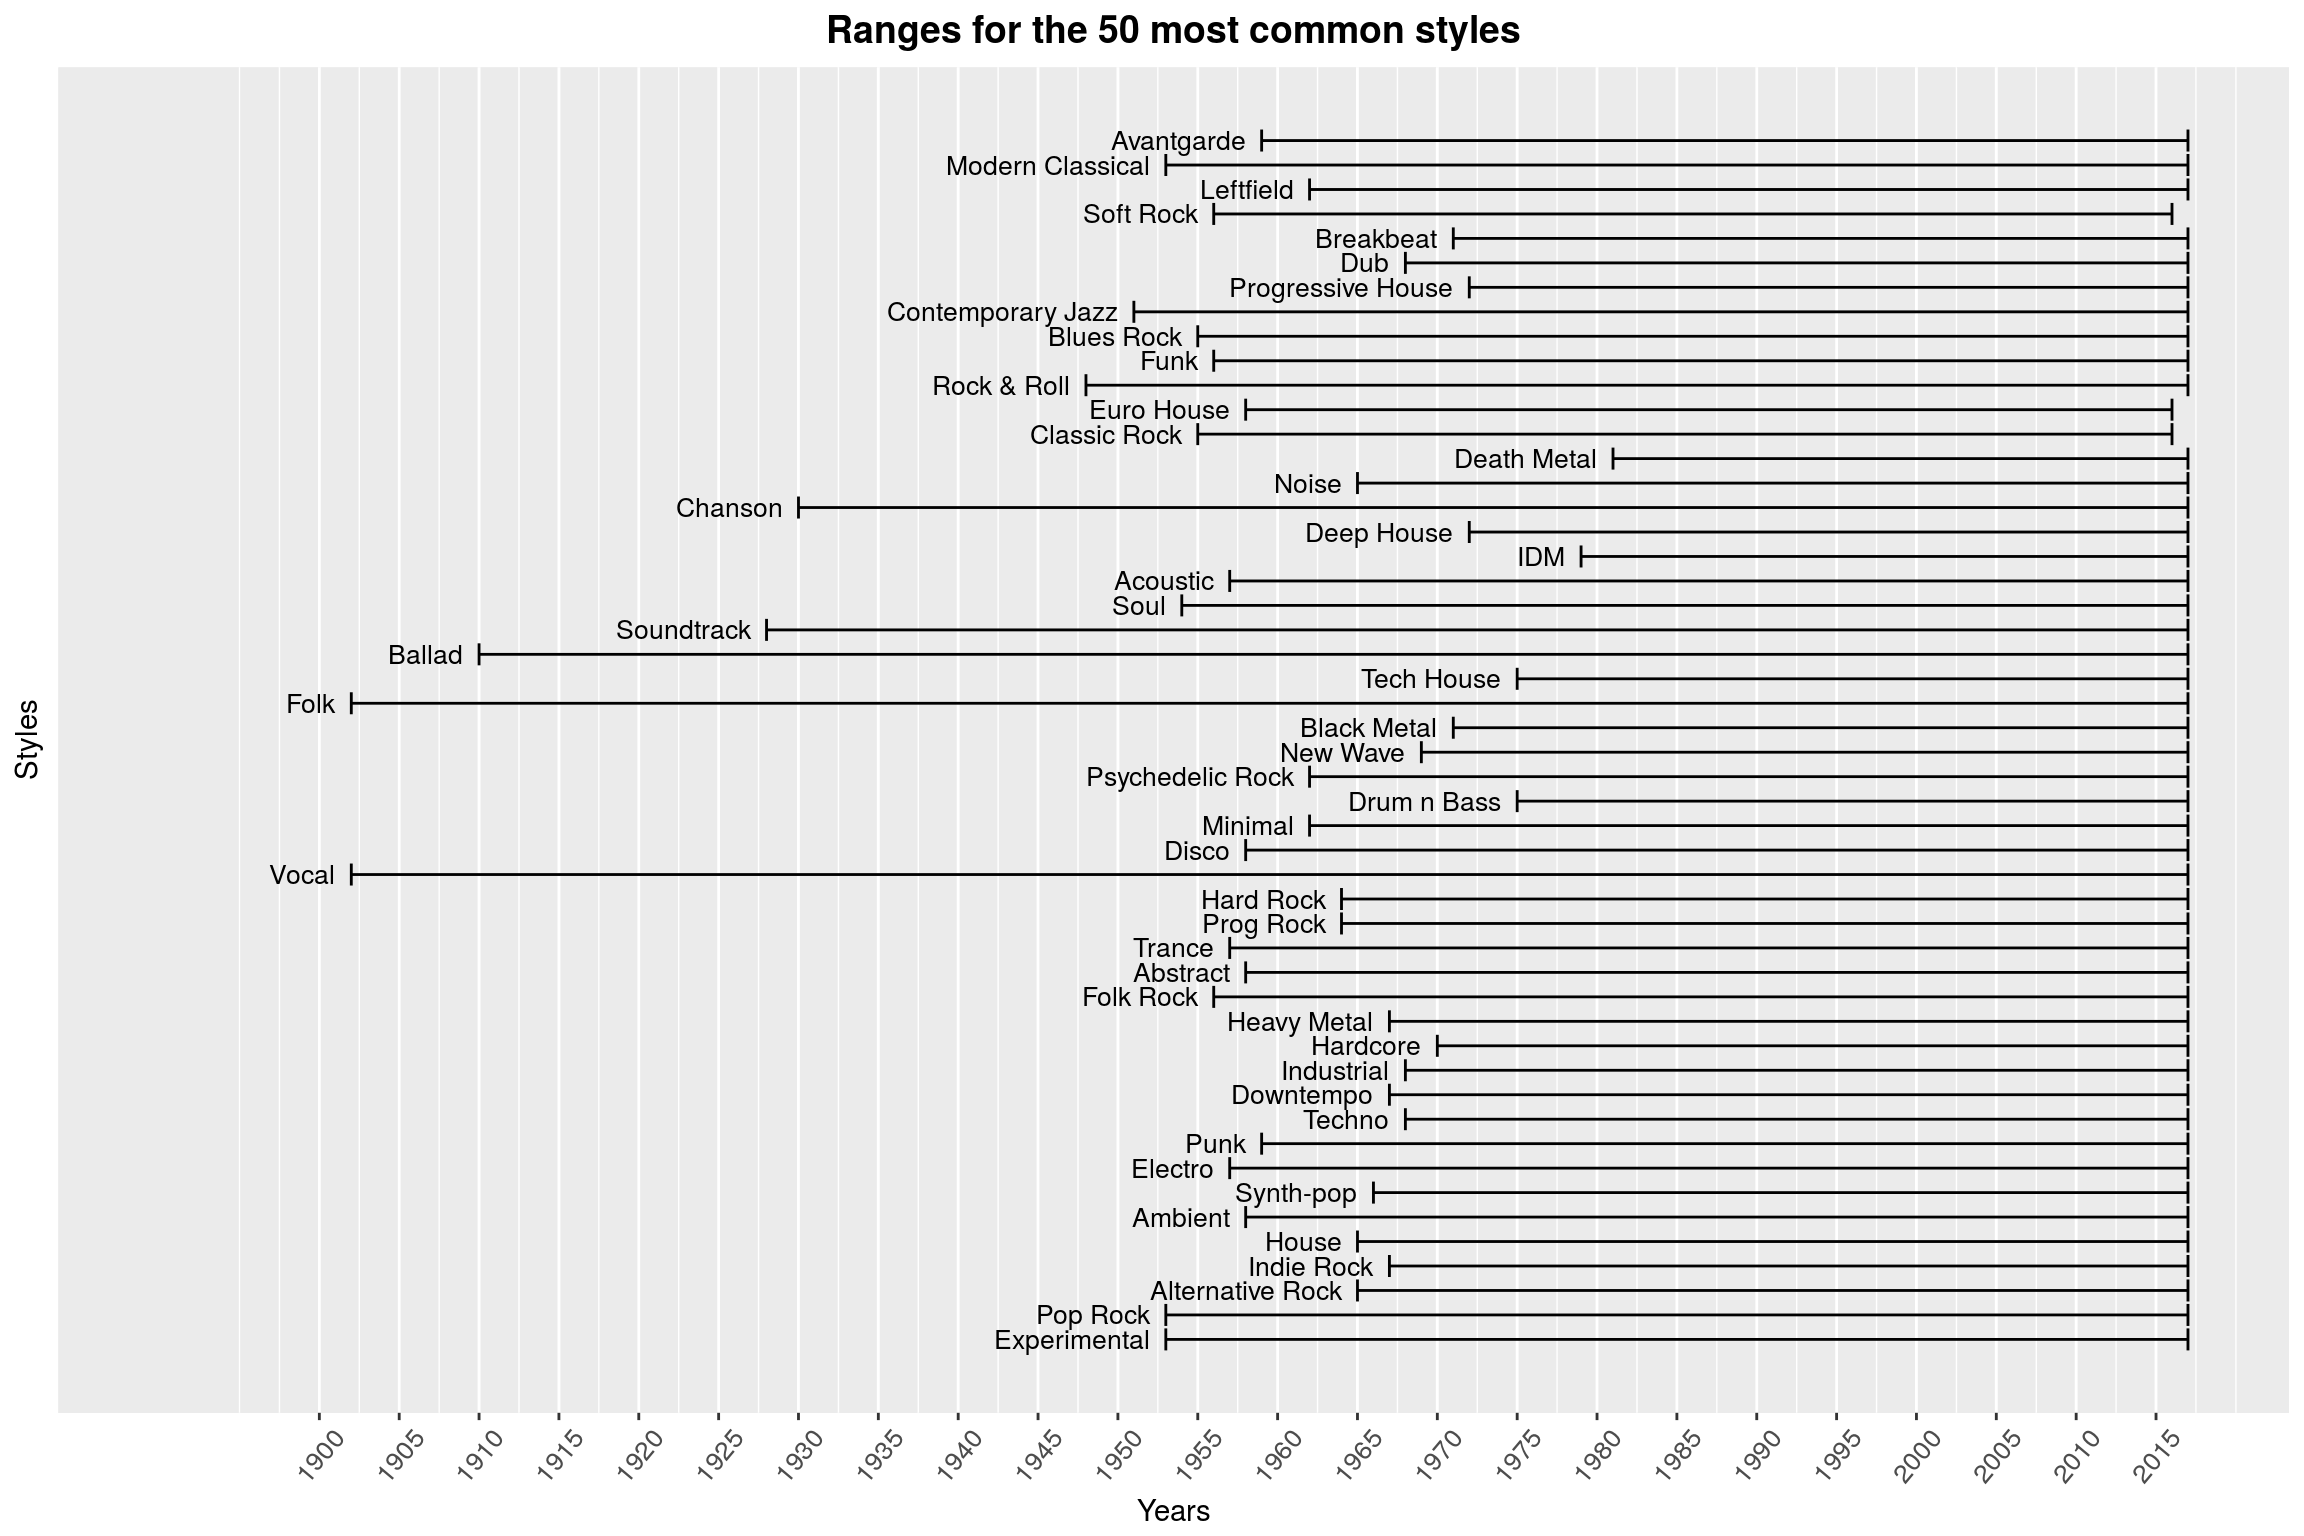 Lifetimes for the 50 most common styles